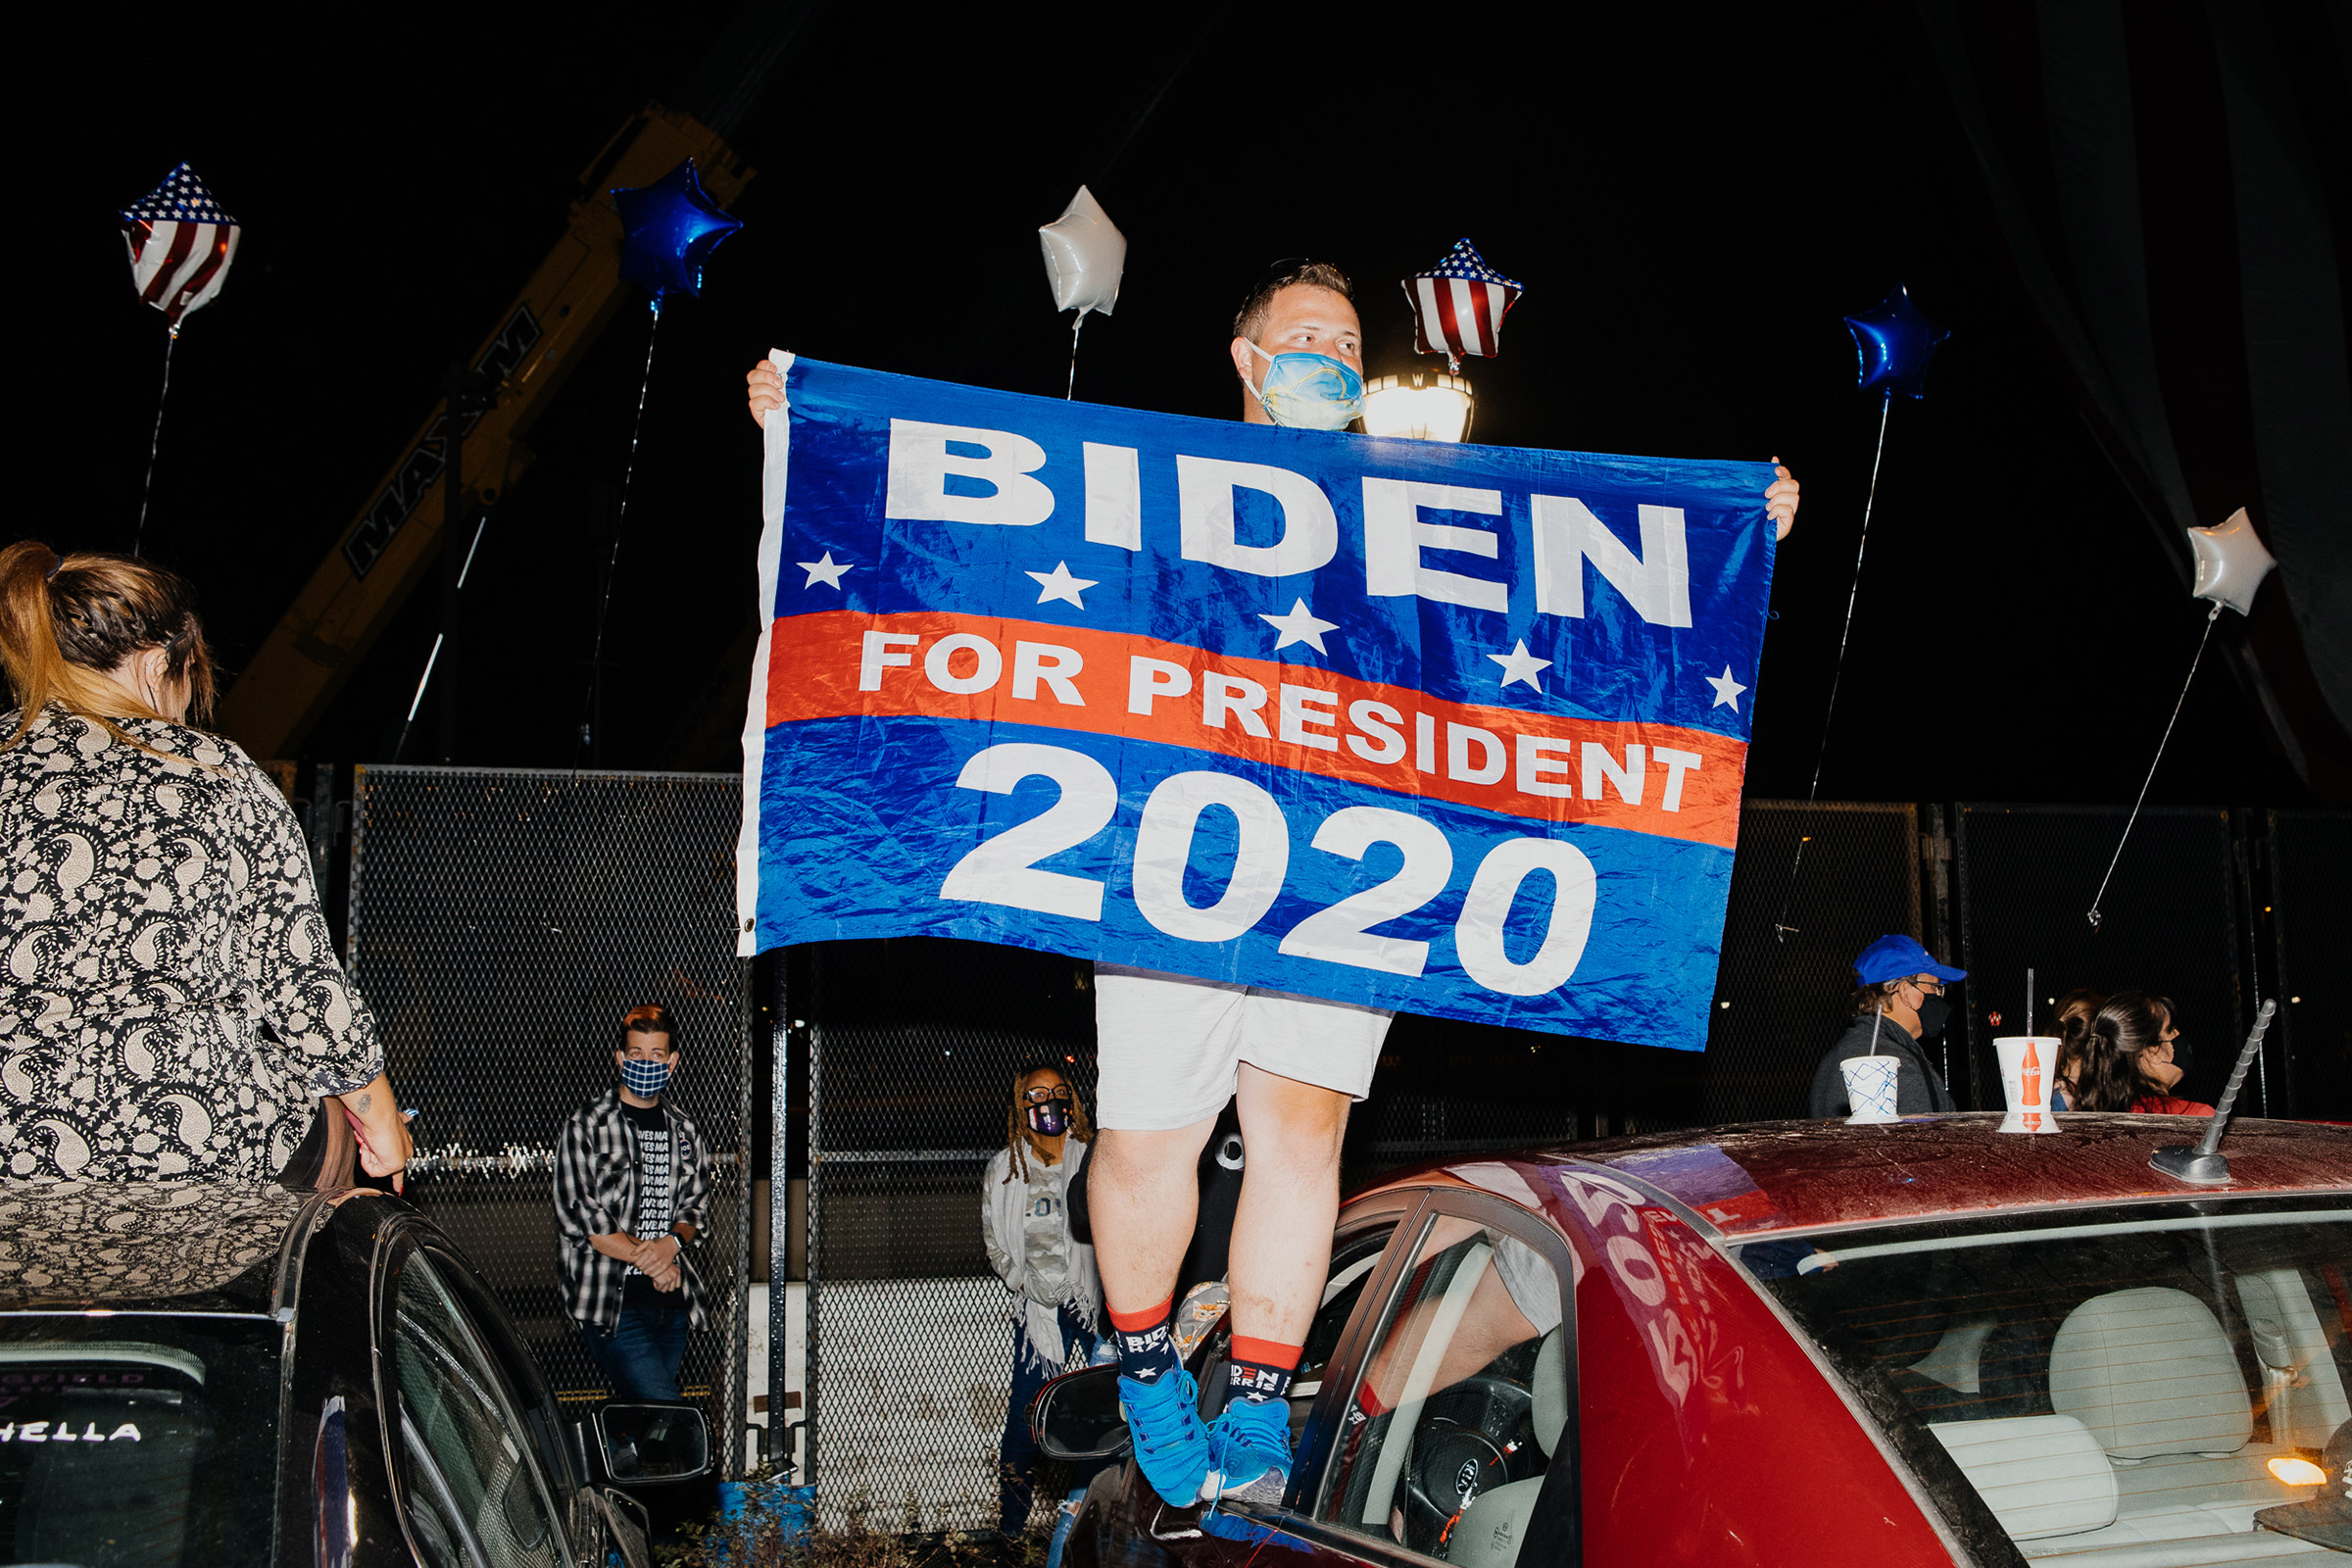 Zach Rossetti, 25, holds a Biden flag on top of his car outside the Chase Center in Wilmington, Delaware on Saturday, November 7, 2020. Rossetti traveled from Scranton, Pennsylvania, the President-Elect’s hometown, to witness Biden’s Speech. “It’s not every day that the President-Elect is from your hometown,” he said. (Michelle Gustafson for Time)